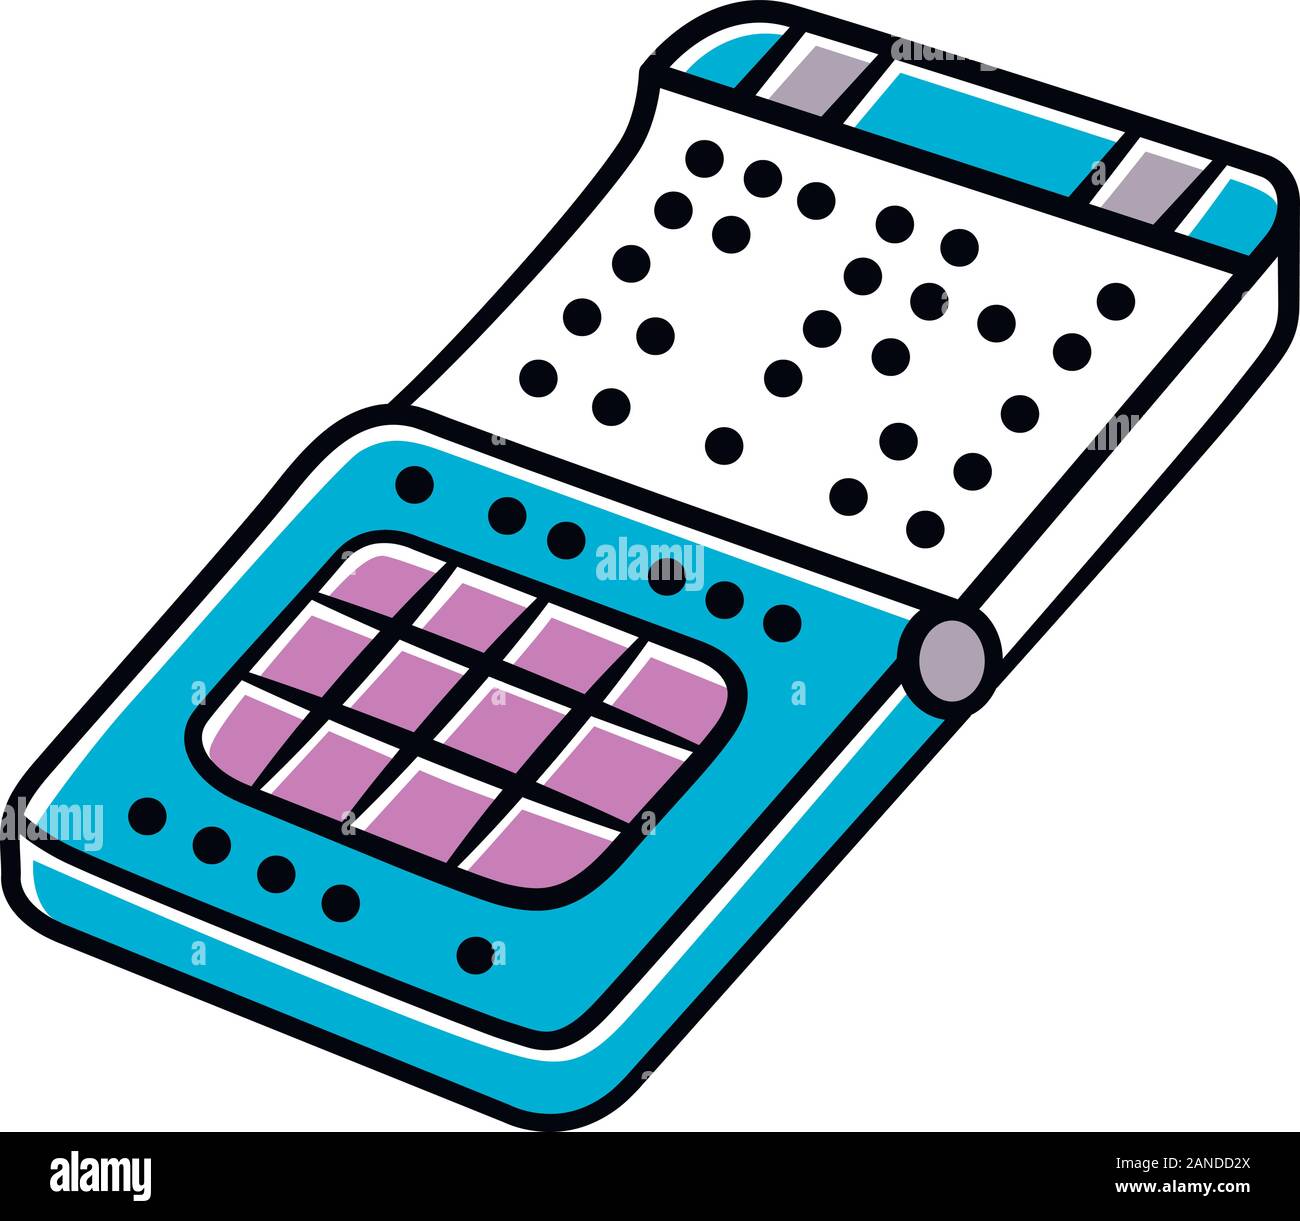 Braille print smartphone color icon. Phone with braille, tactile display, screen. Blind person gadget, technological advancement. Blindness oriented m Stock Vector